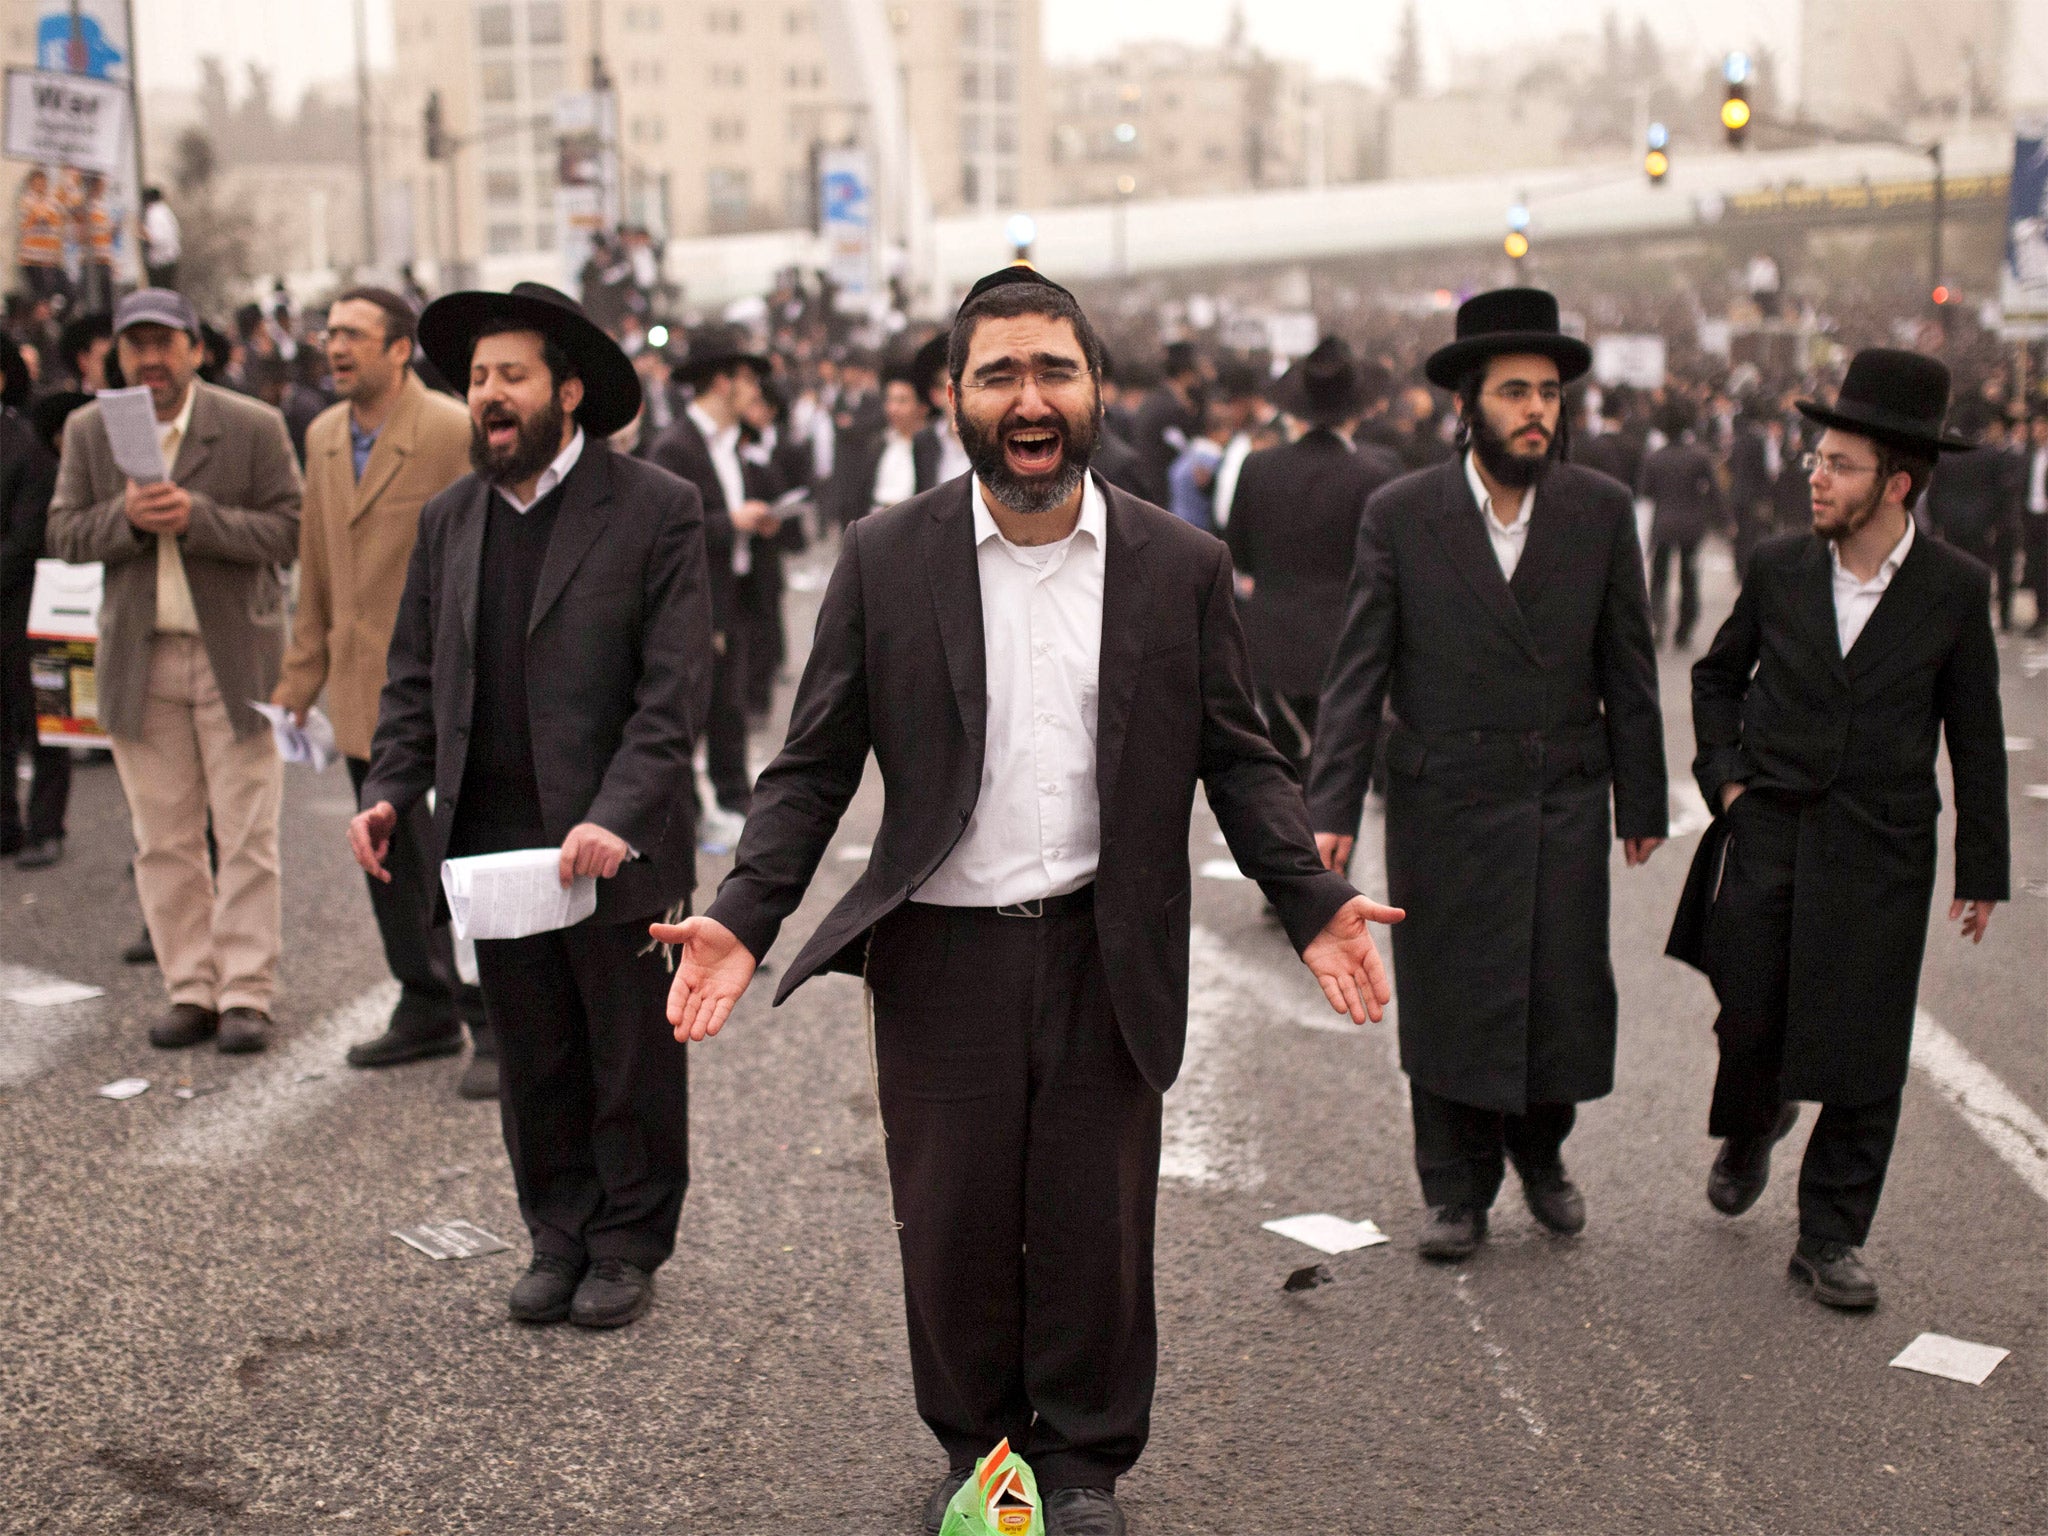 Under pressure: more than 300,000 ultra-Orthodox men turned out for a protest against the draft bill in Jerusalem last month